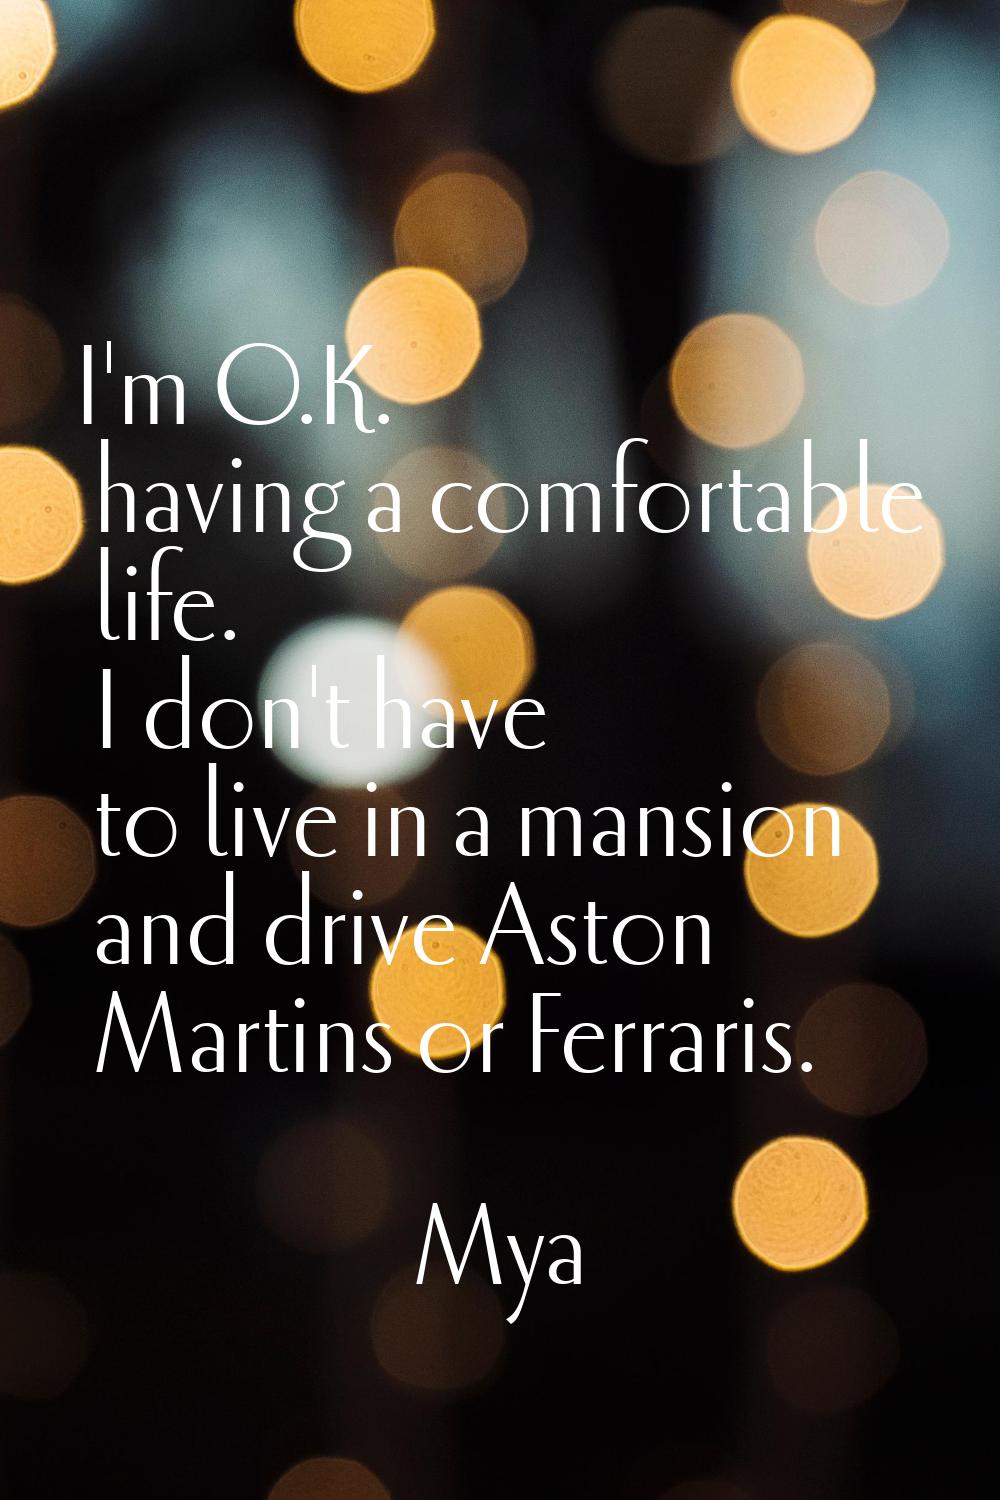 I'm O.K. having a comfortable life. I don't have to live in a mansion and drive Aston Martins or Fe